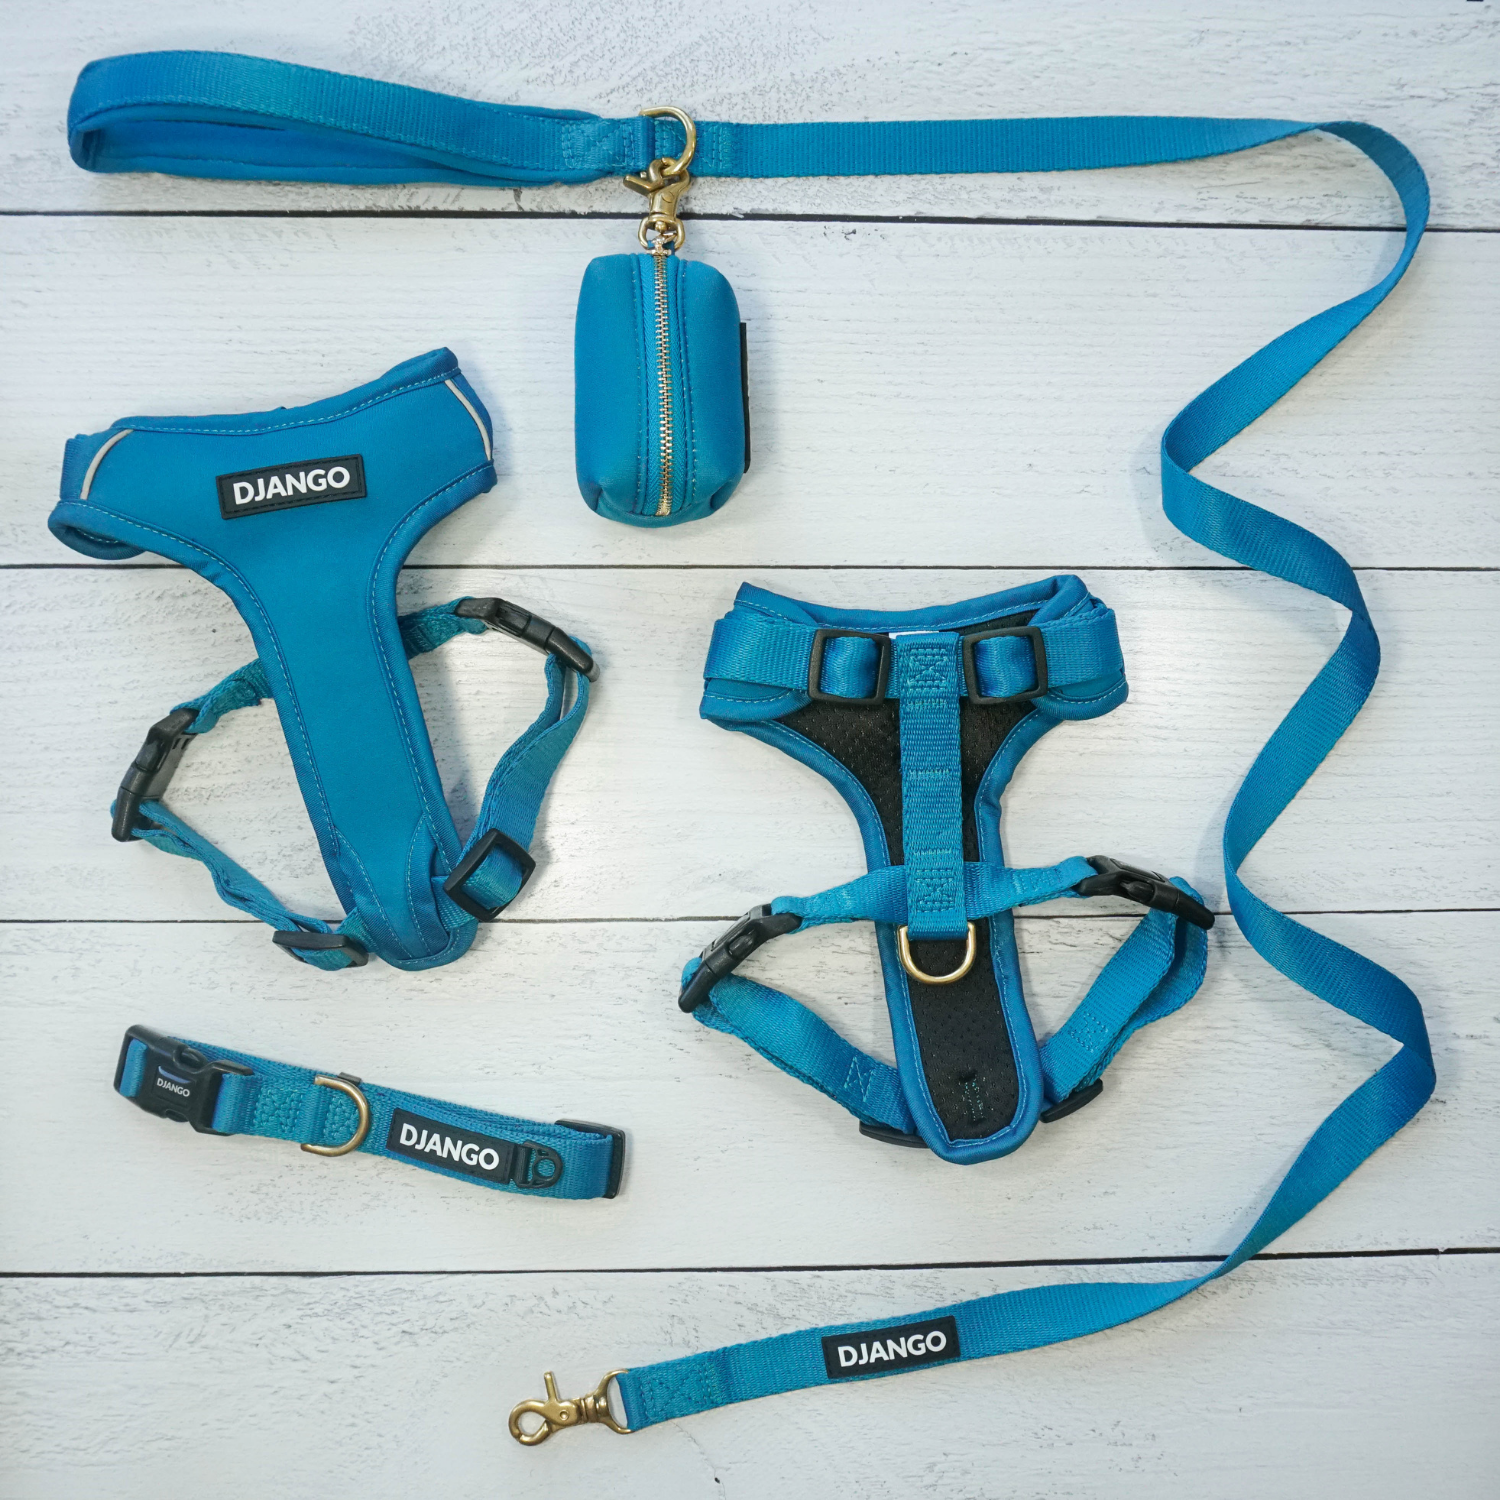 DJANGO Adventure Bundle in Pacific Blue - The Adventure Bundle includes our comfortable, durable, and weather-resistant Adventure Dog Harness, Adventure Dog Collar, Standard Adventure Dog Leash, and chic Waste Bag Holder. All items feature high-strength and corrosion-resistant solid brass hardware. Save $$$ when you complete your set and order the Adventure Bundle - djangobrand.com